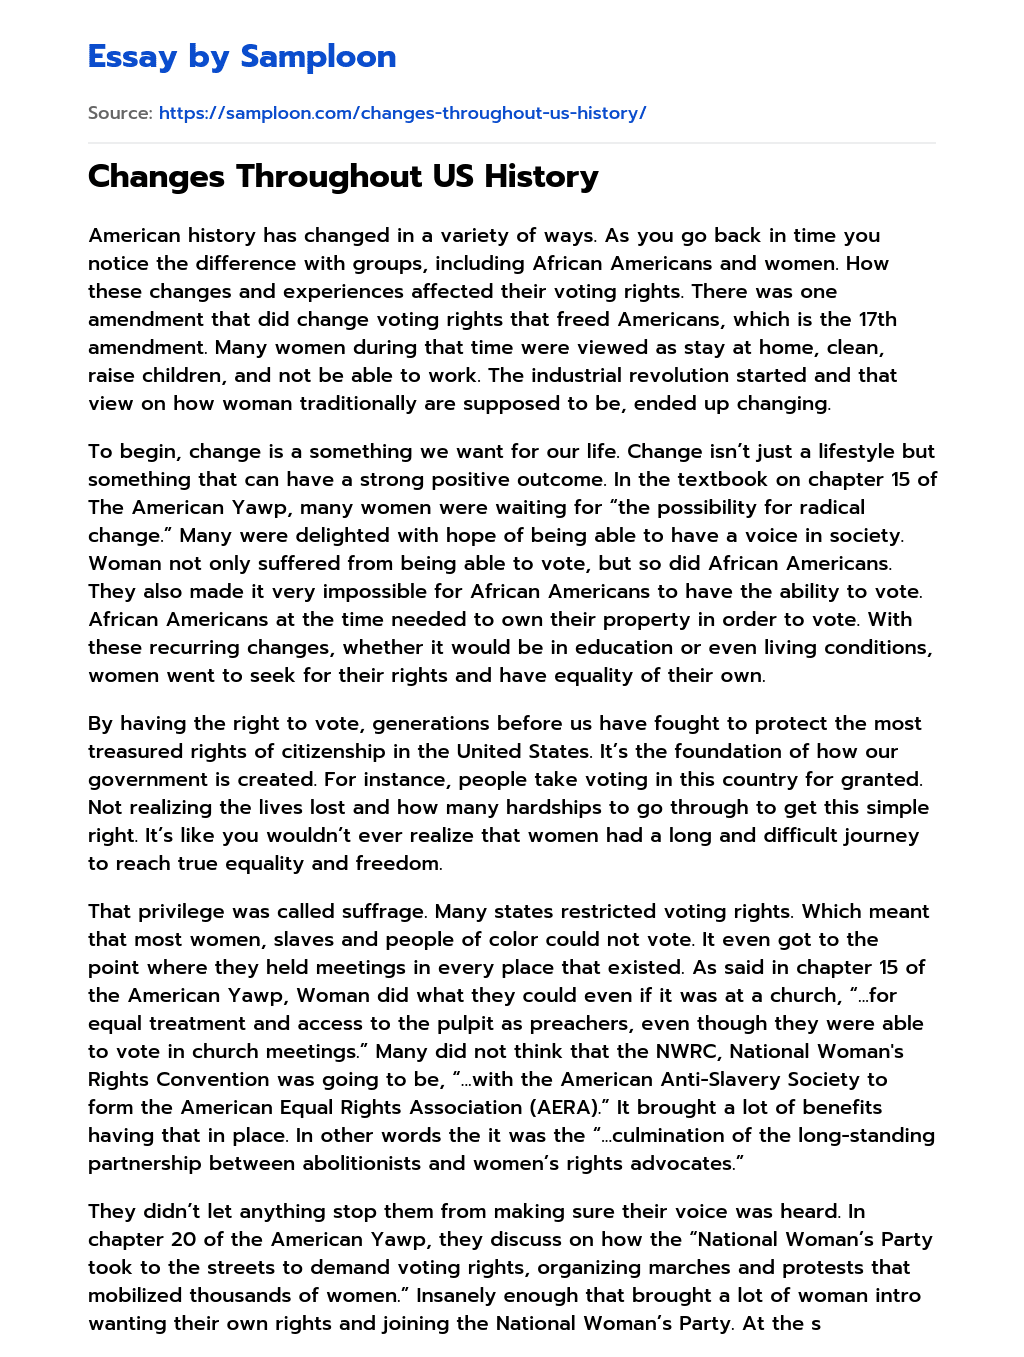 Changes Throughout US History essay